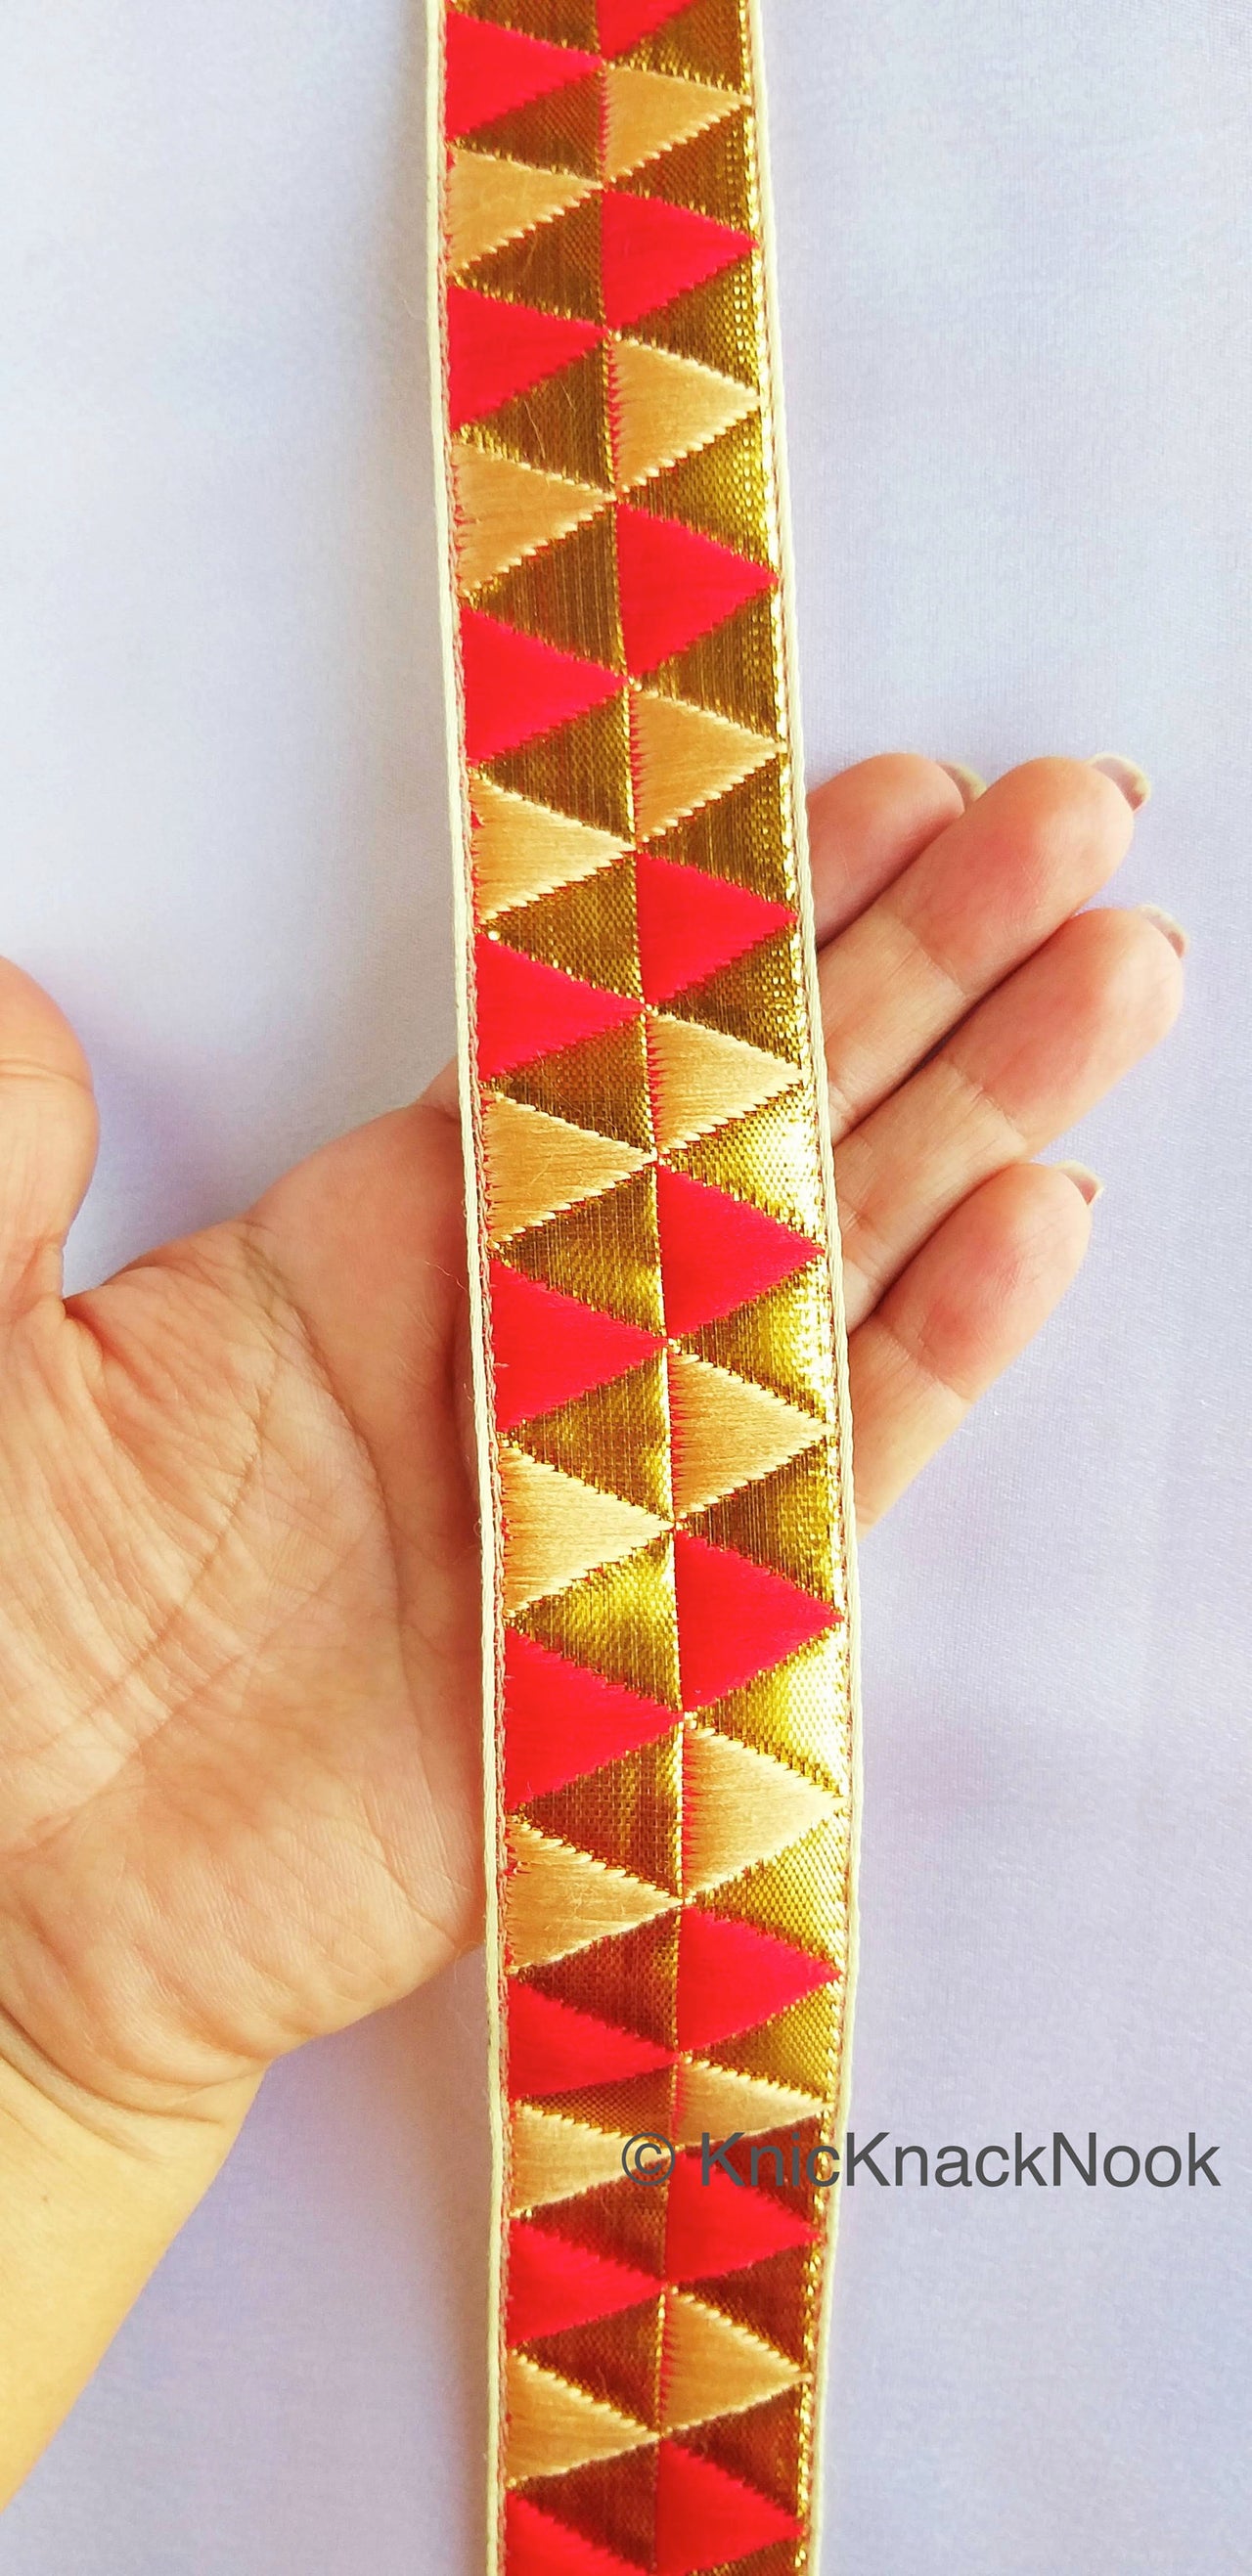 Red and Gold Fabric Trim